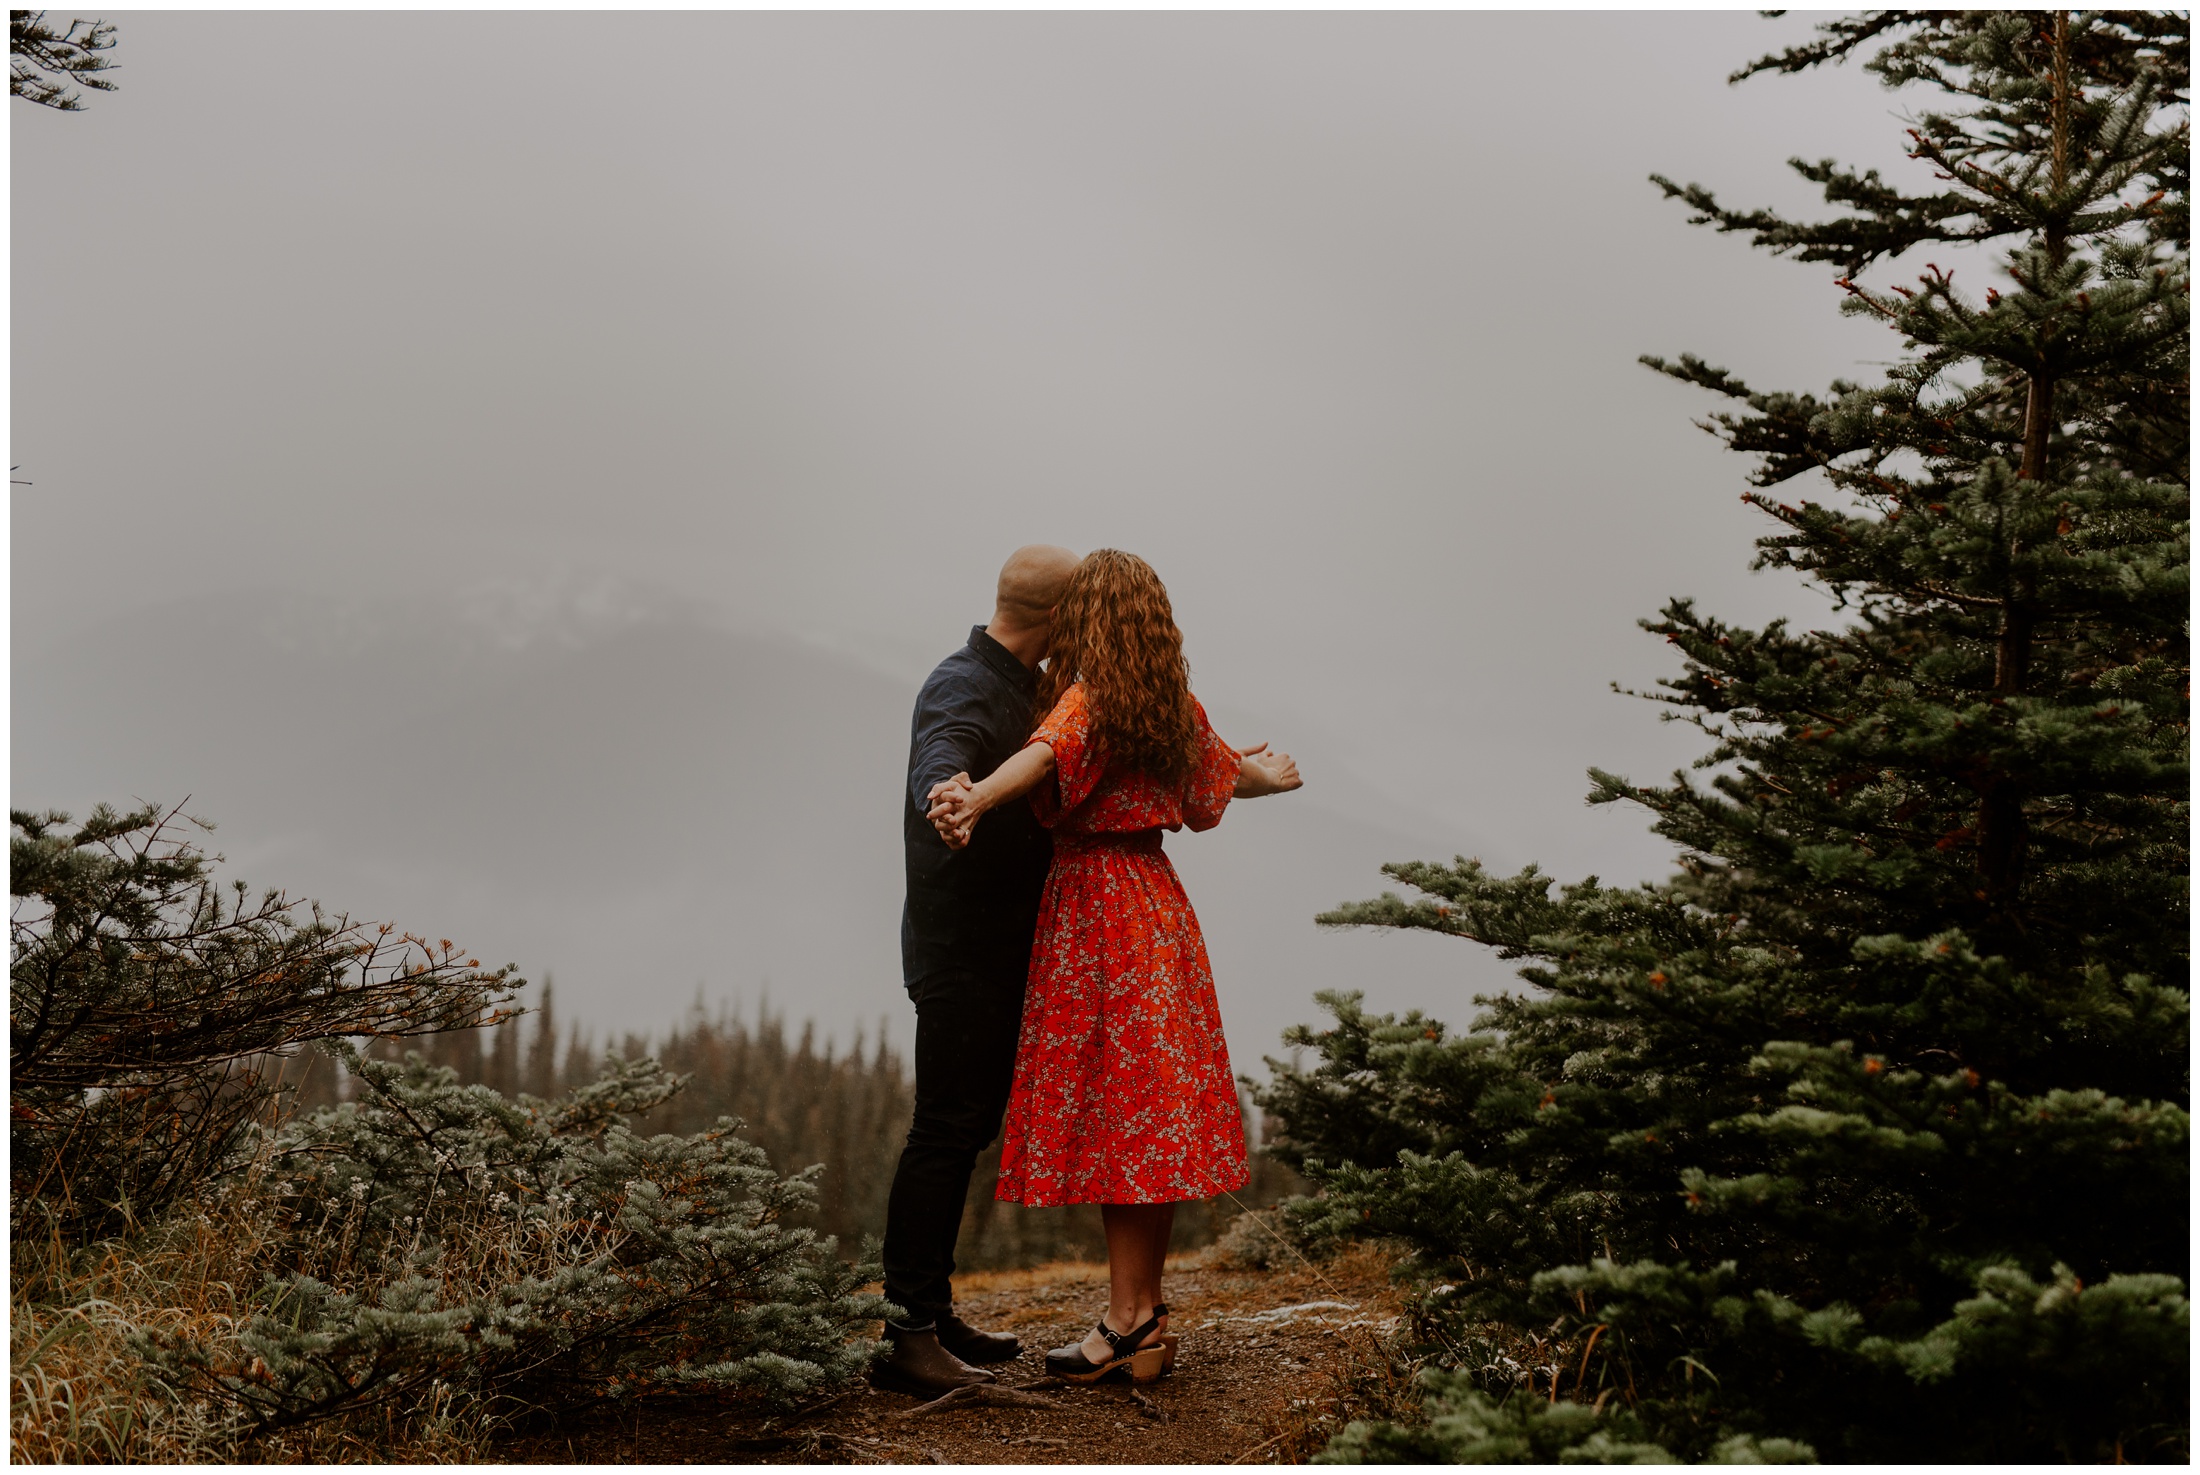 Olympic National Park Engagements | Jessica Heron Images 010.JPG